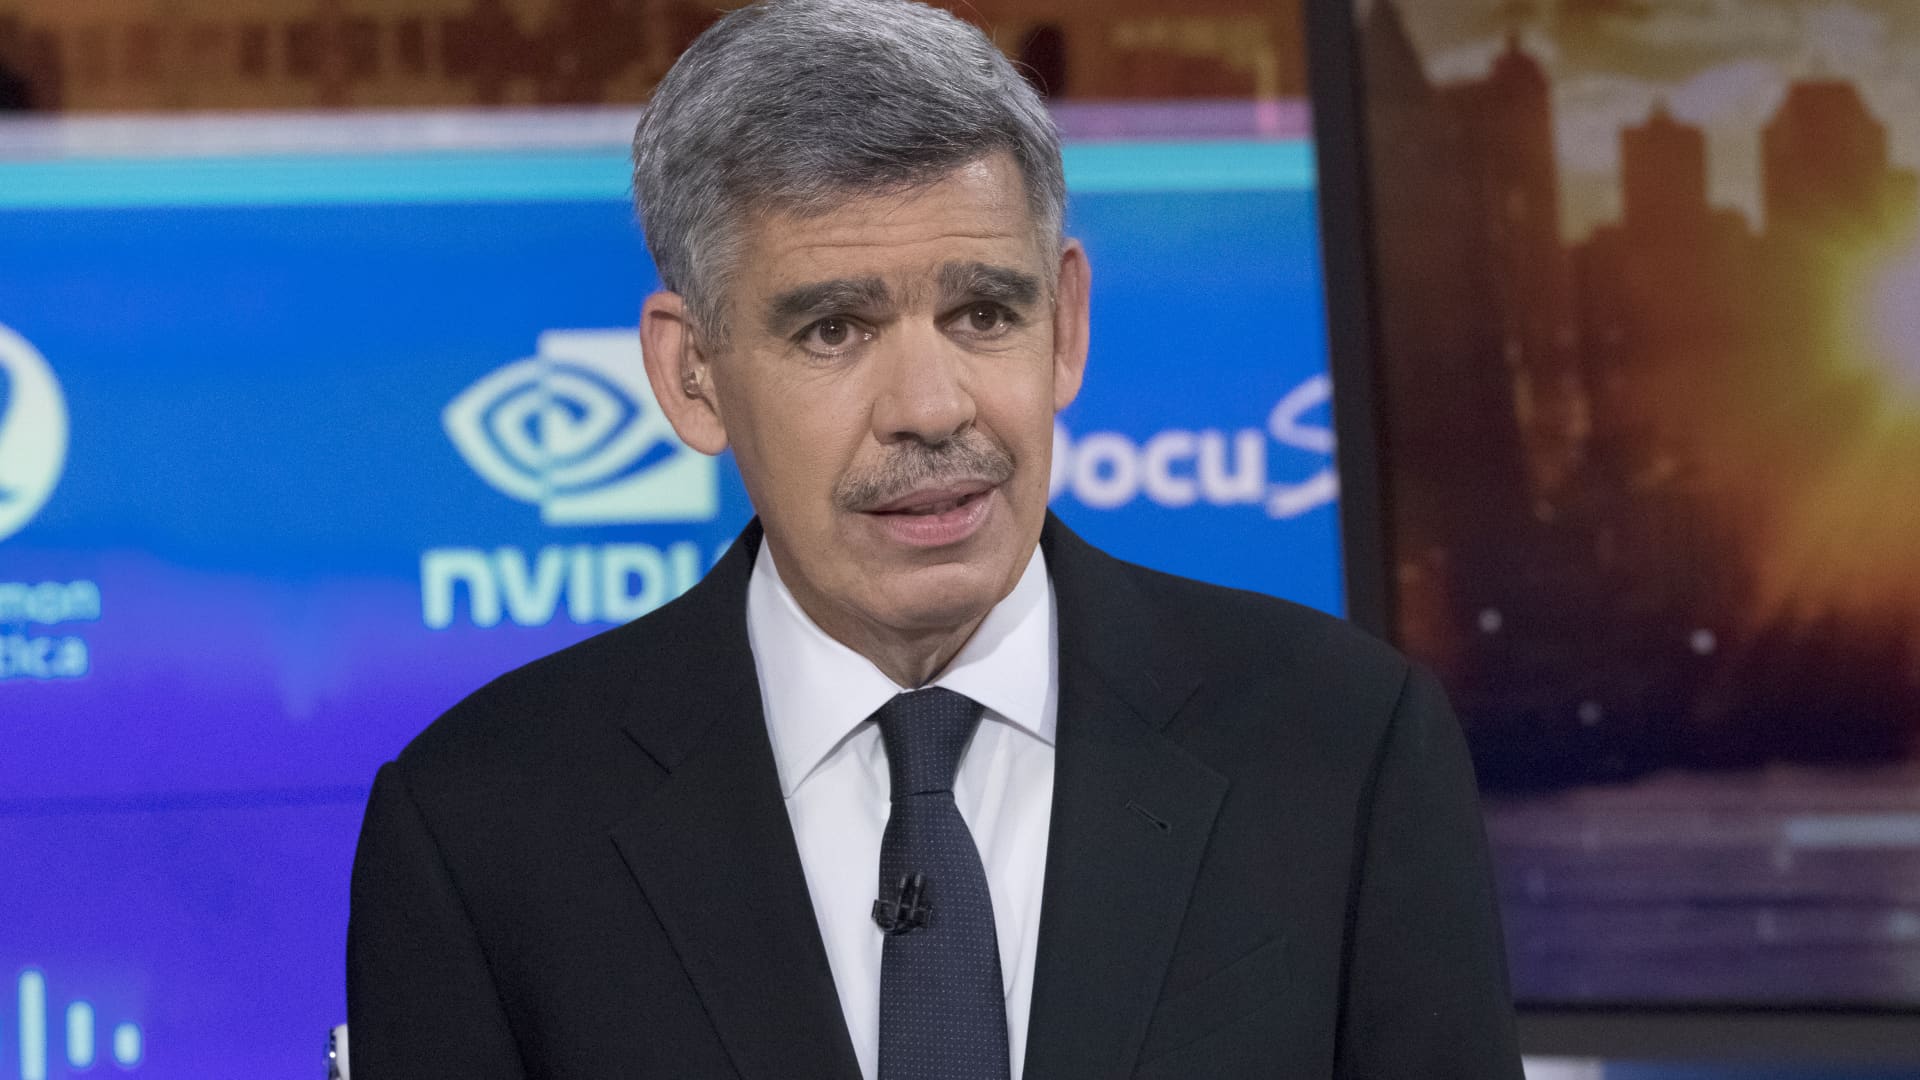 El-Erian says the Fed has to move aggressively to beat inflation